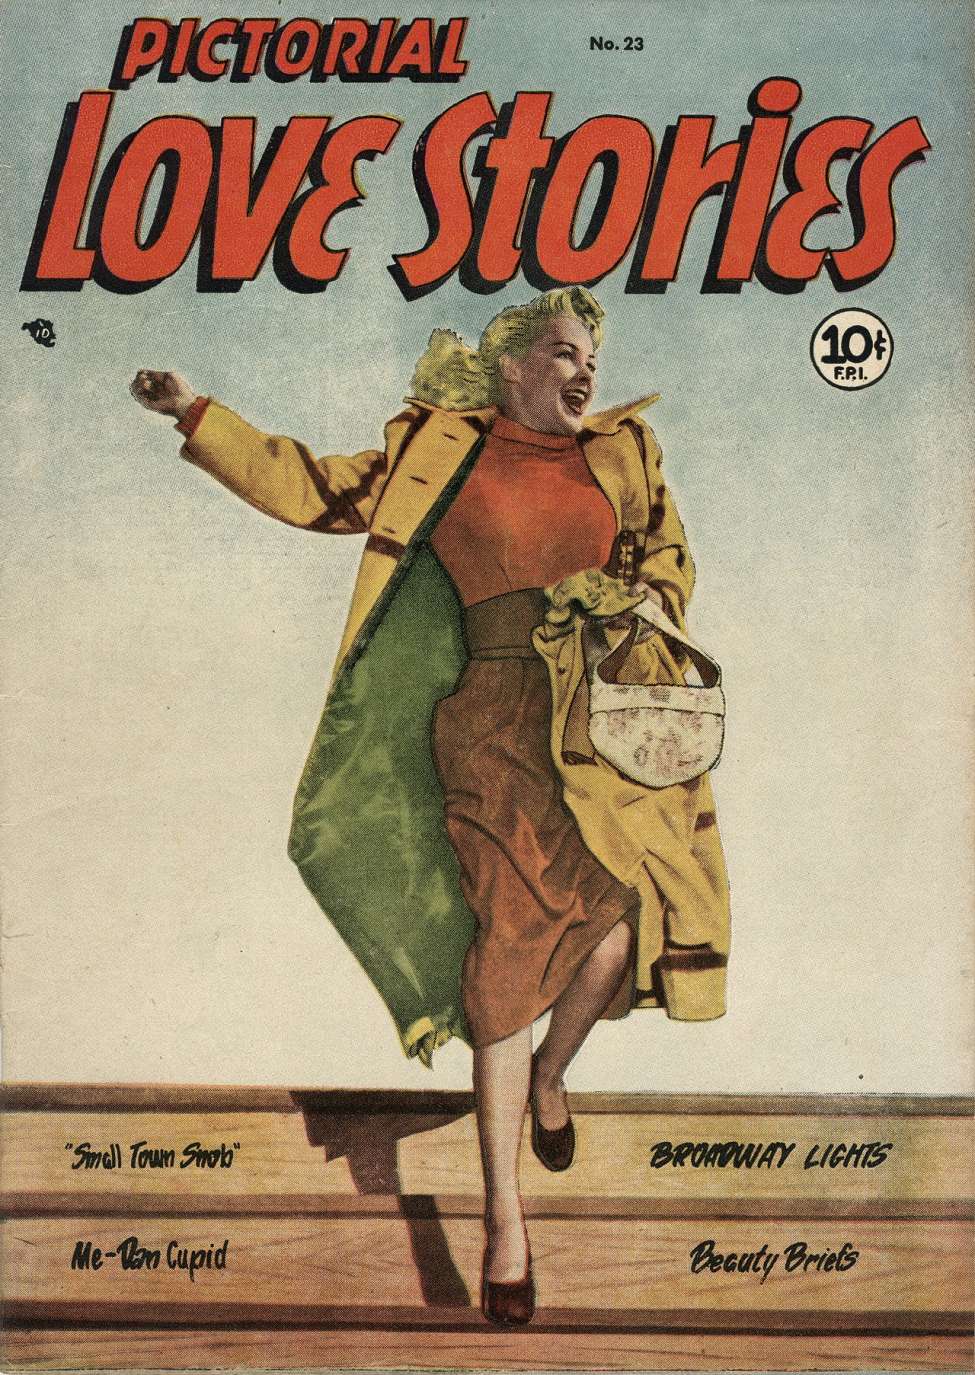 Book Cover For Pictorial Love Stories 23 - Version 2